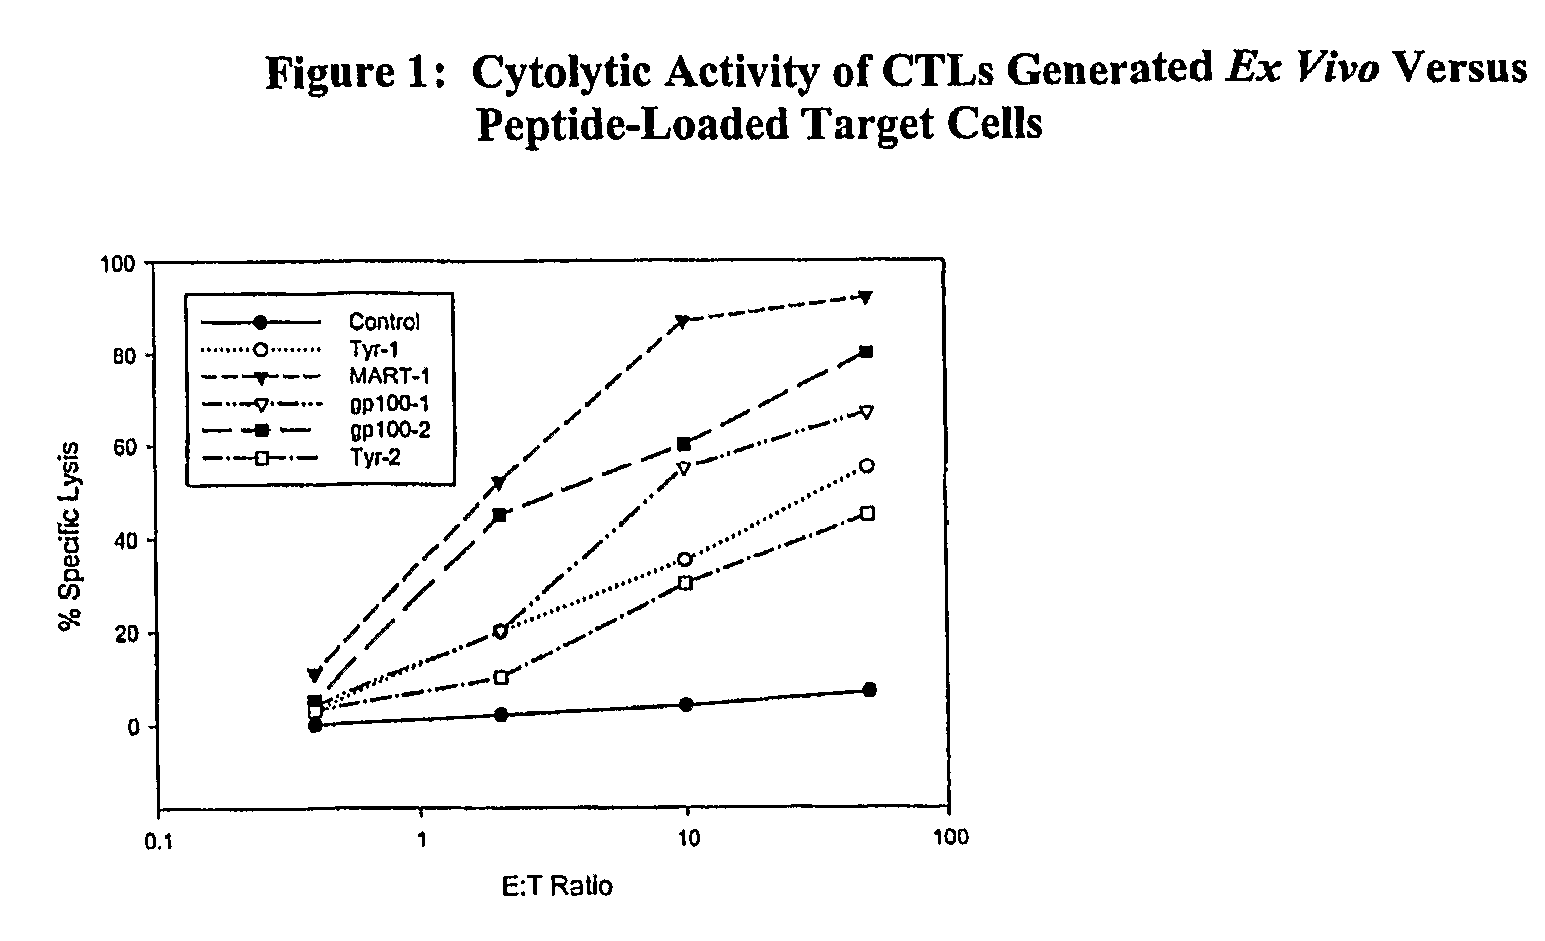 Cancer treatment combining lymphodepleting agent with CTLs and cytokines